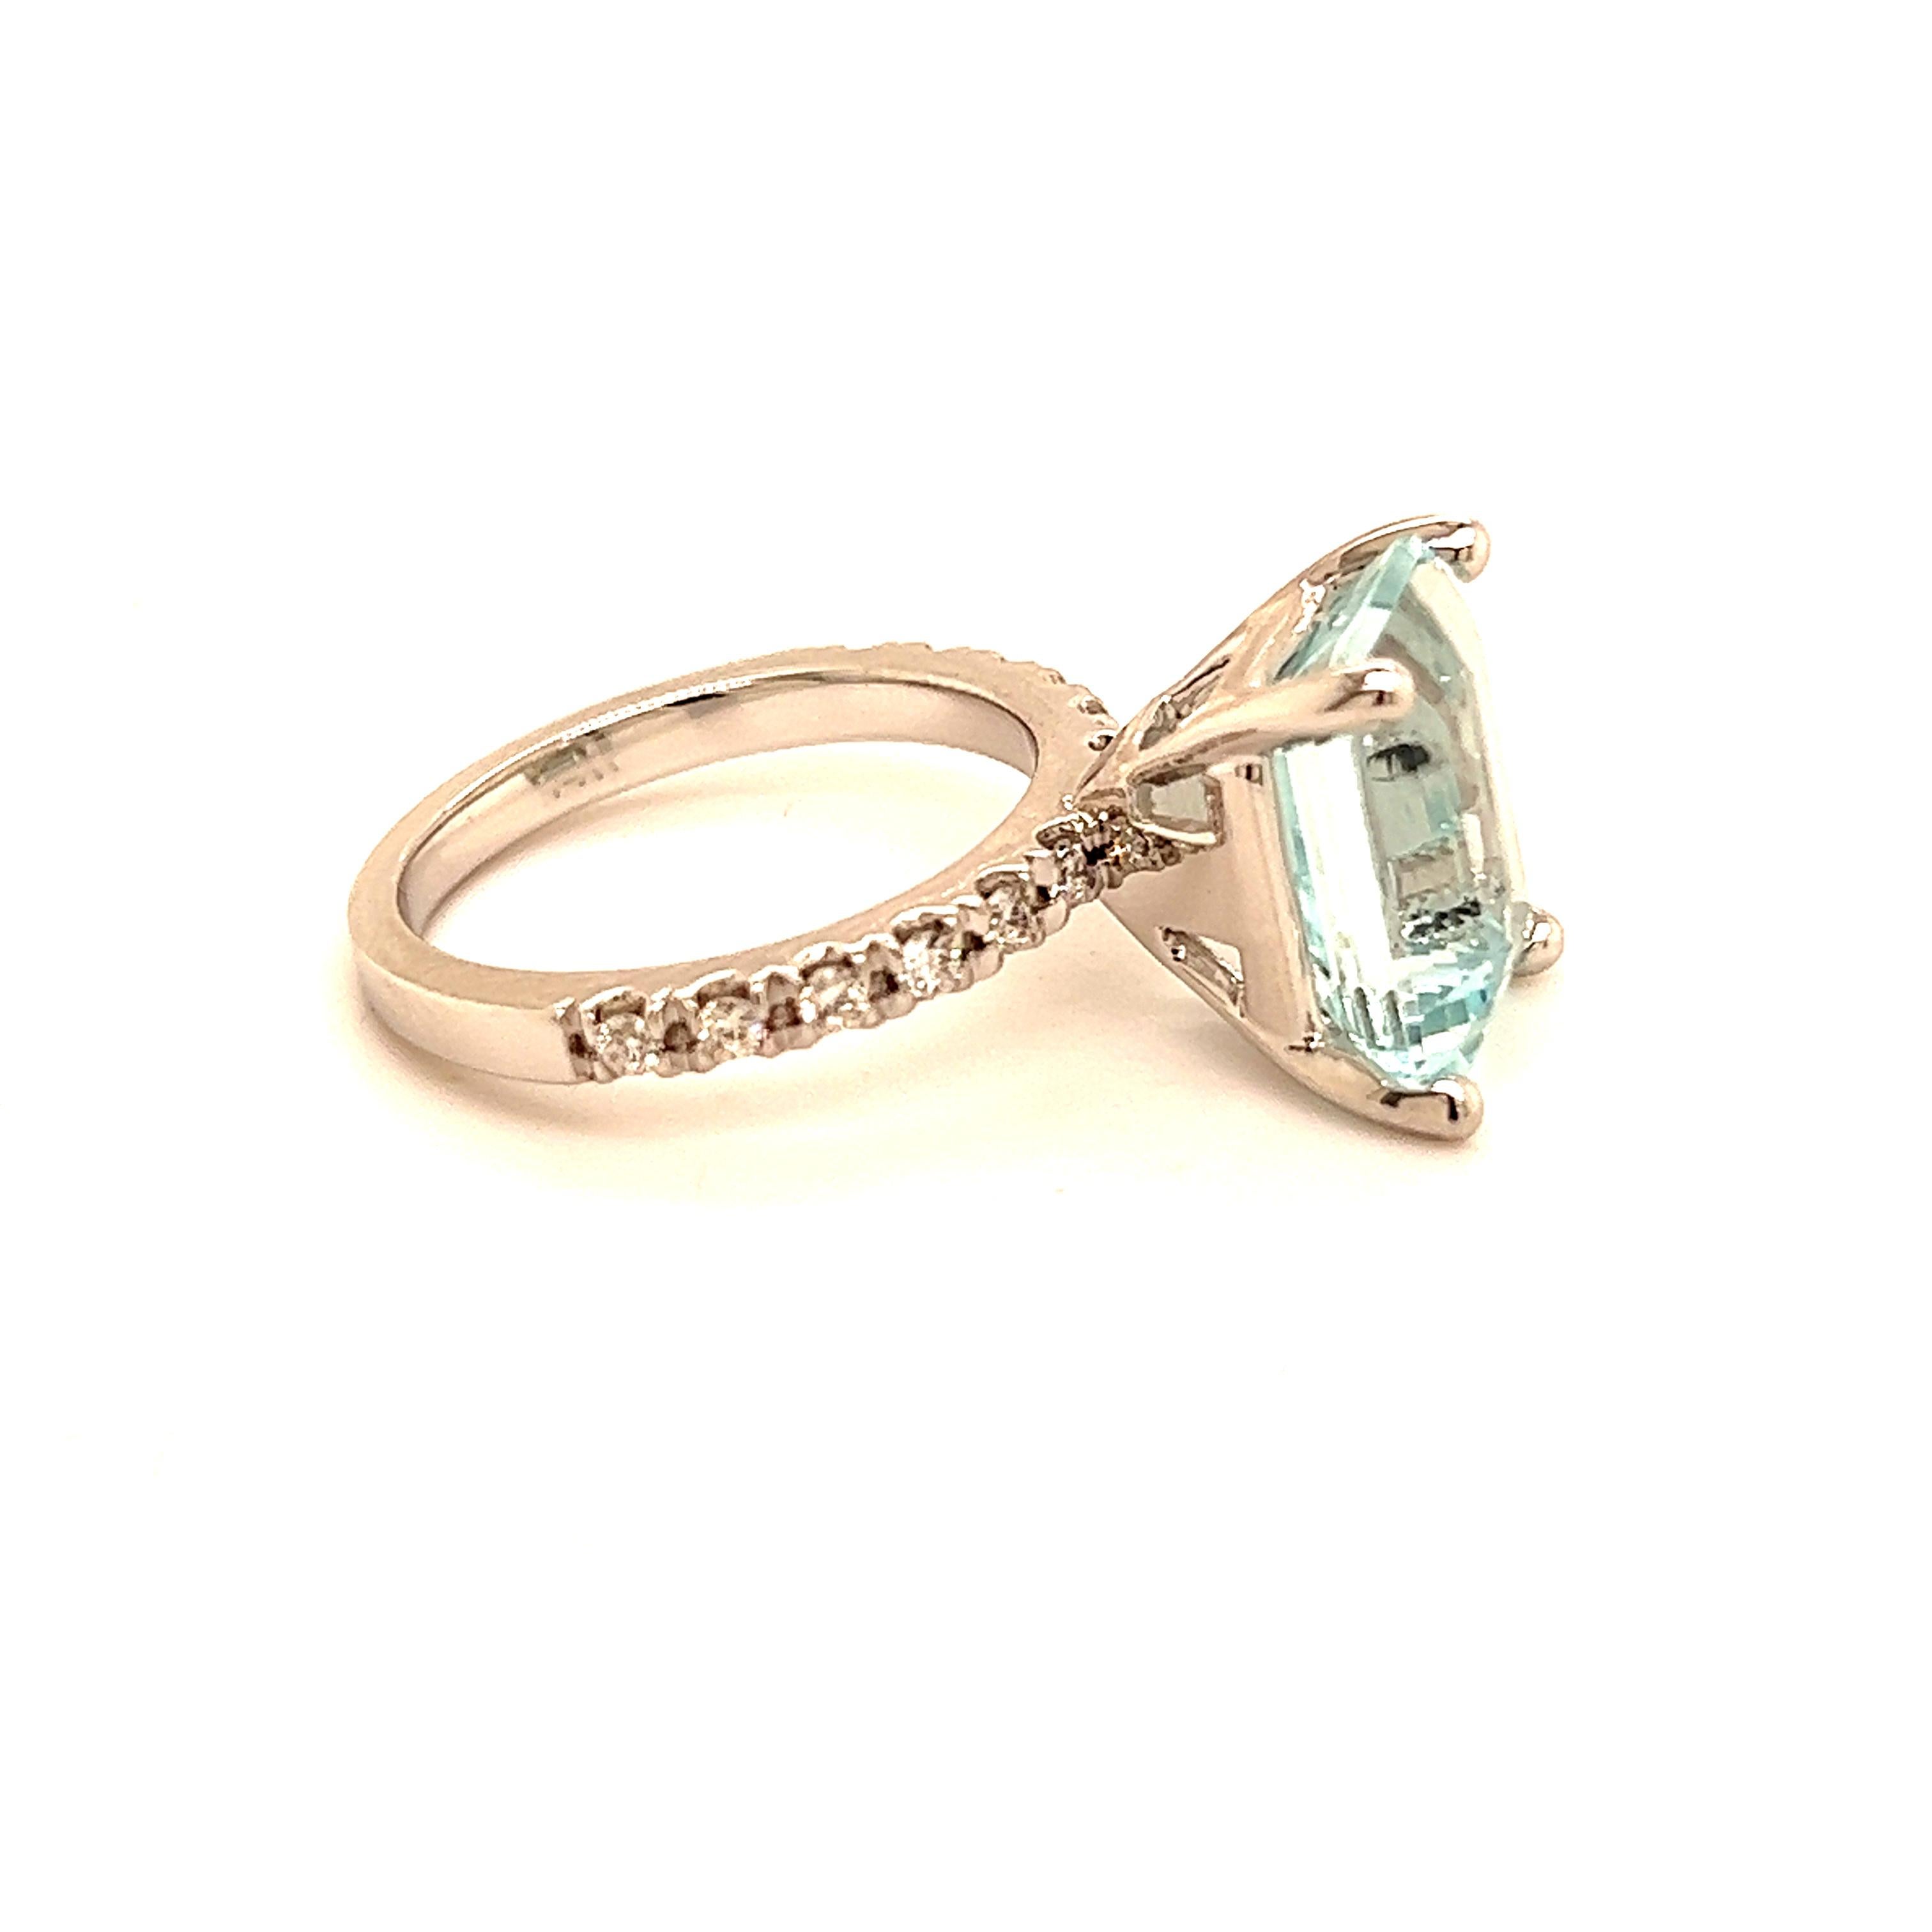 Natural Aquamarine Diamond Ring 14k W Gold 5.78 TCW Certified For Sale 2